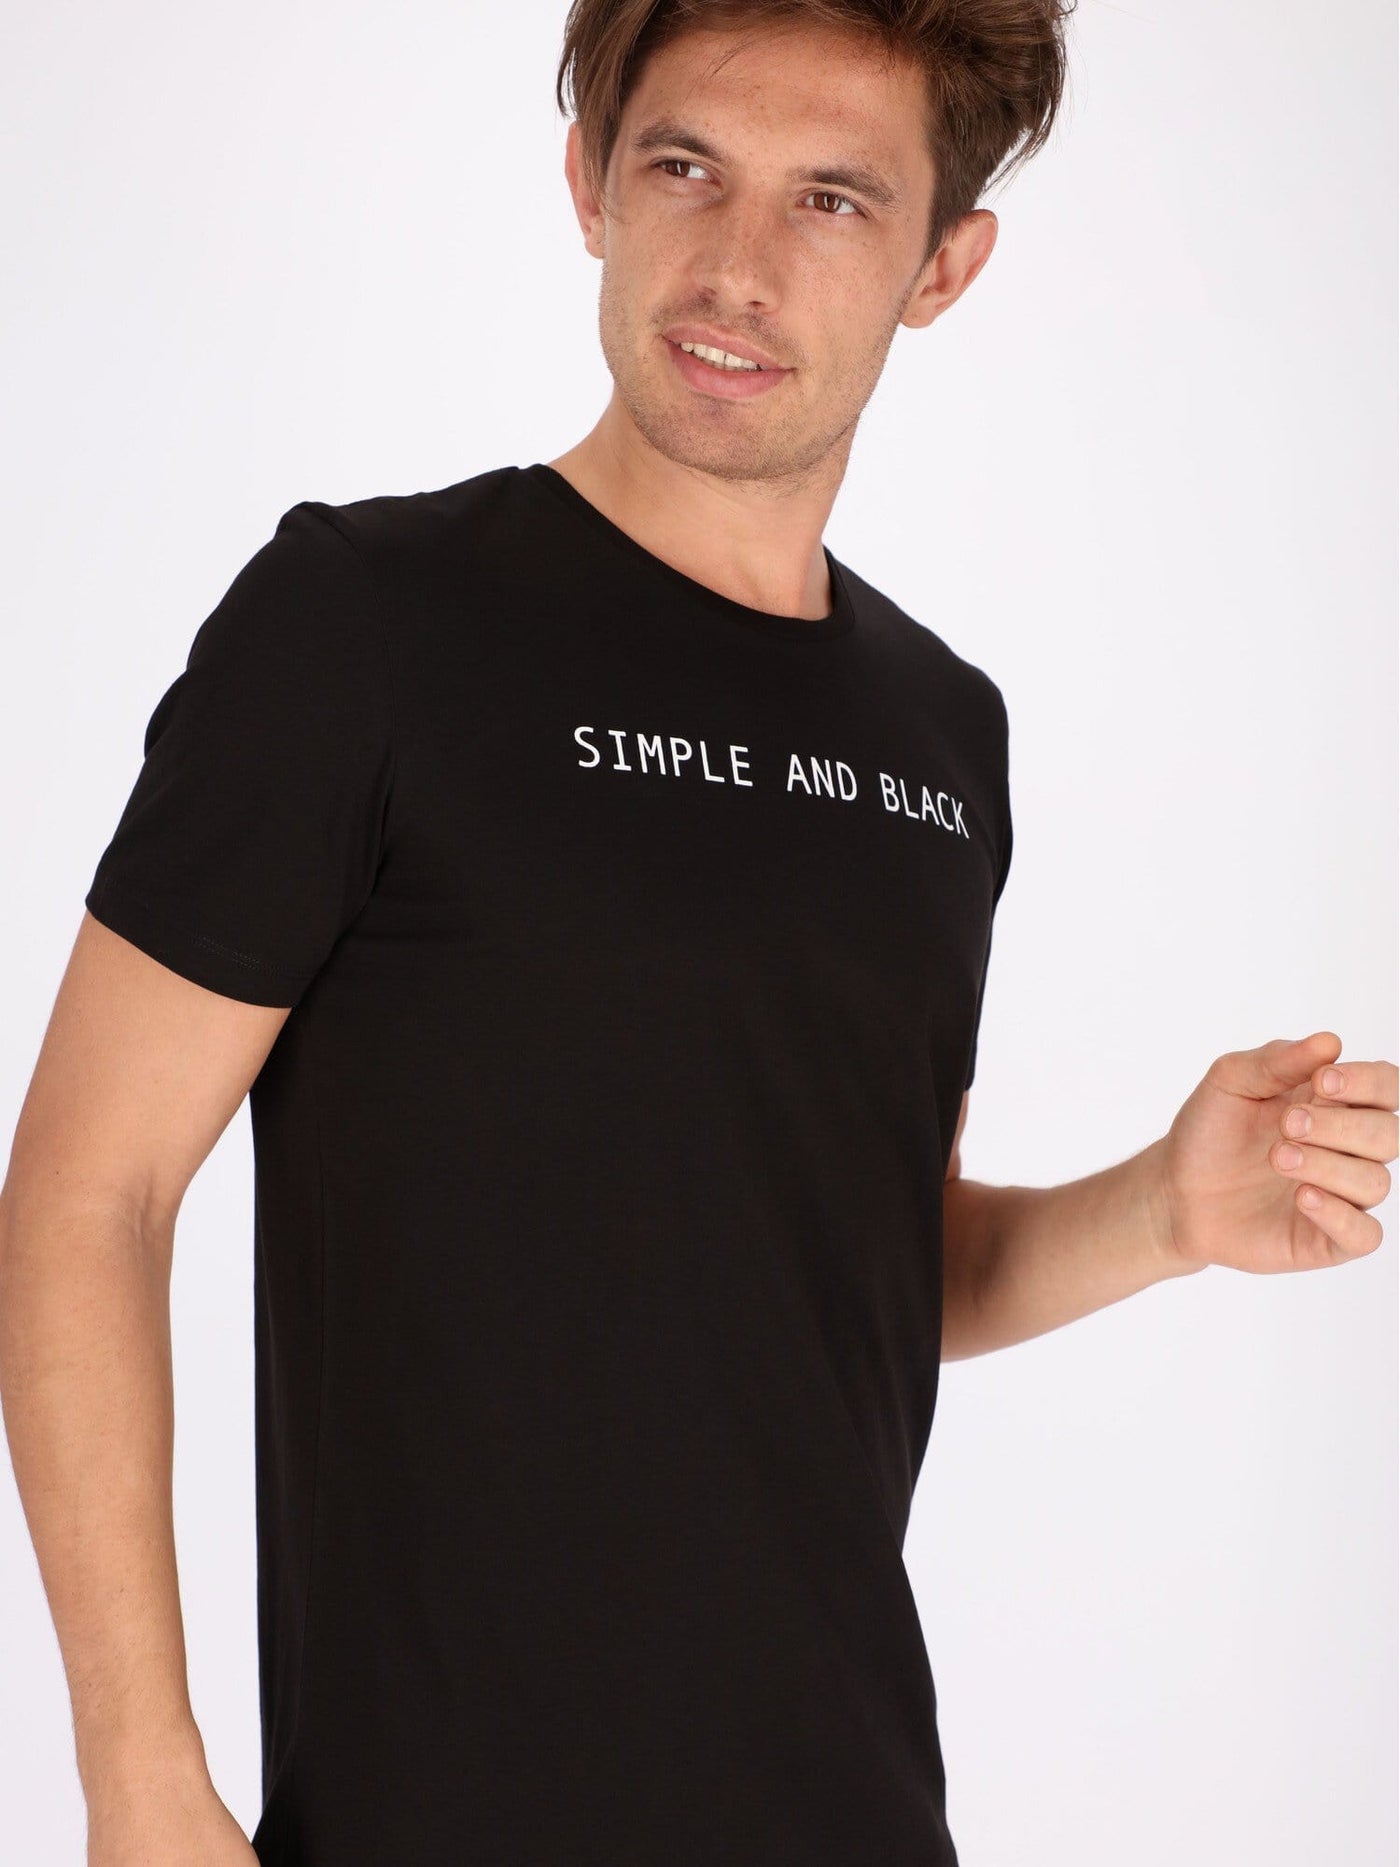 OR T-Shirts Simple And White/Black Front Text Print T-Shirt